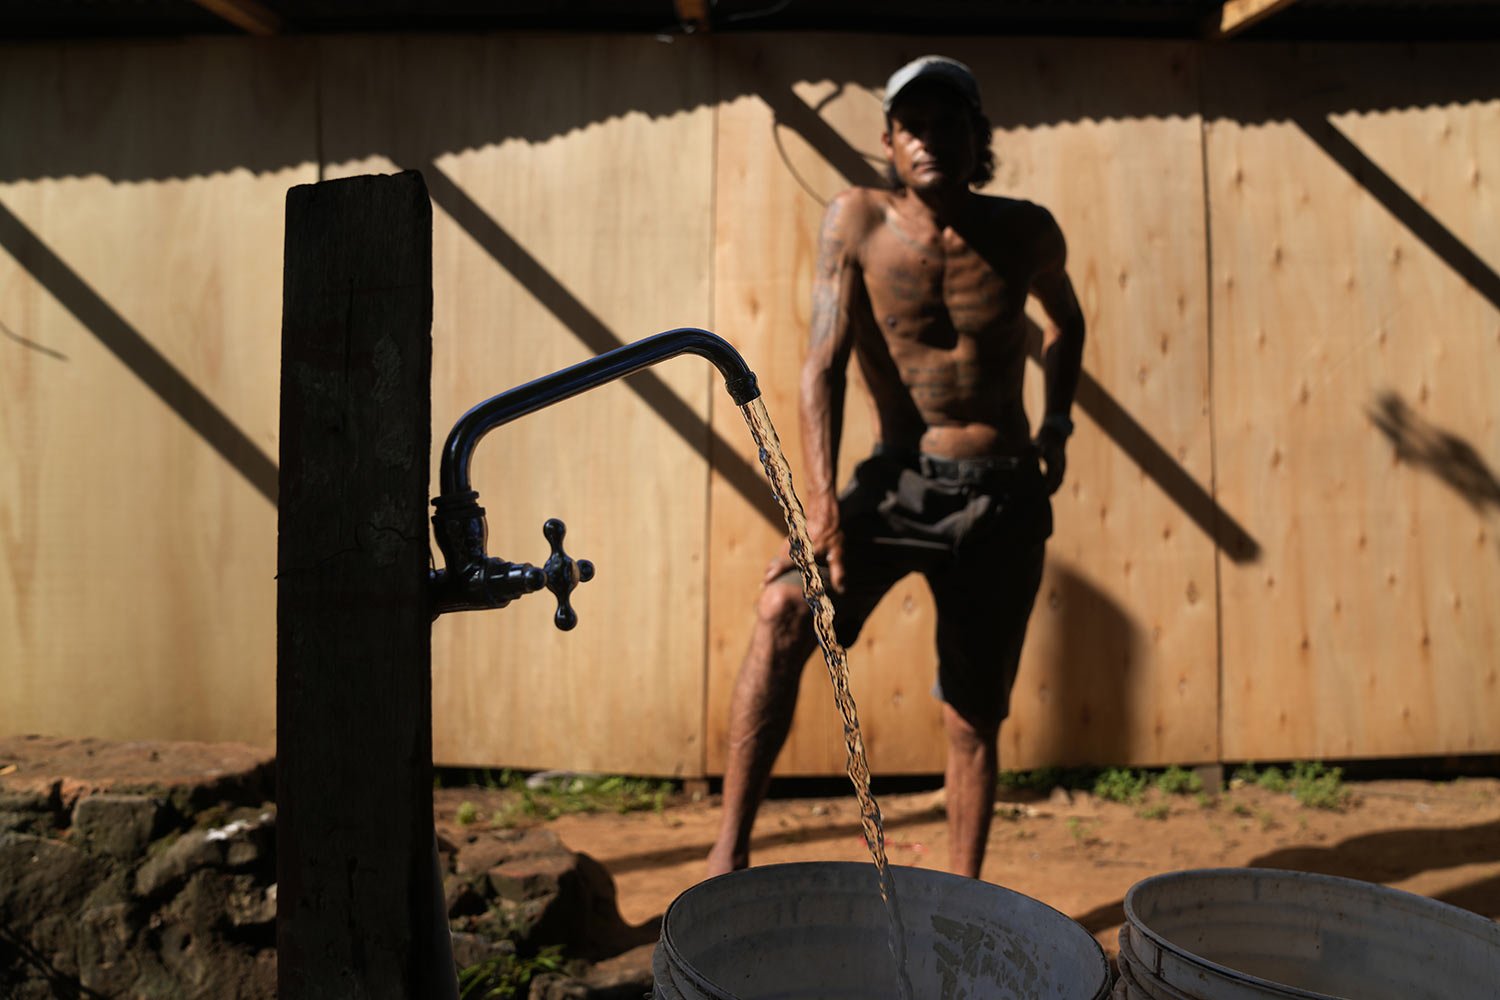  Carmelo Del Valle, who was displaced from his home by the rising waters of the Paraguay River, fills buckets with water to haul to his temporary shelter in Asuncion, Paraguay, March 18, 2023. (AP Photo/Jorge Saenz) 